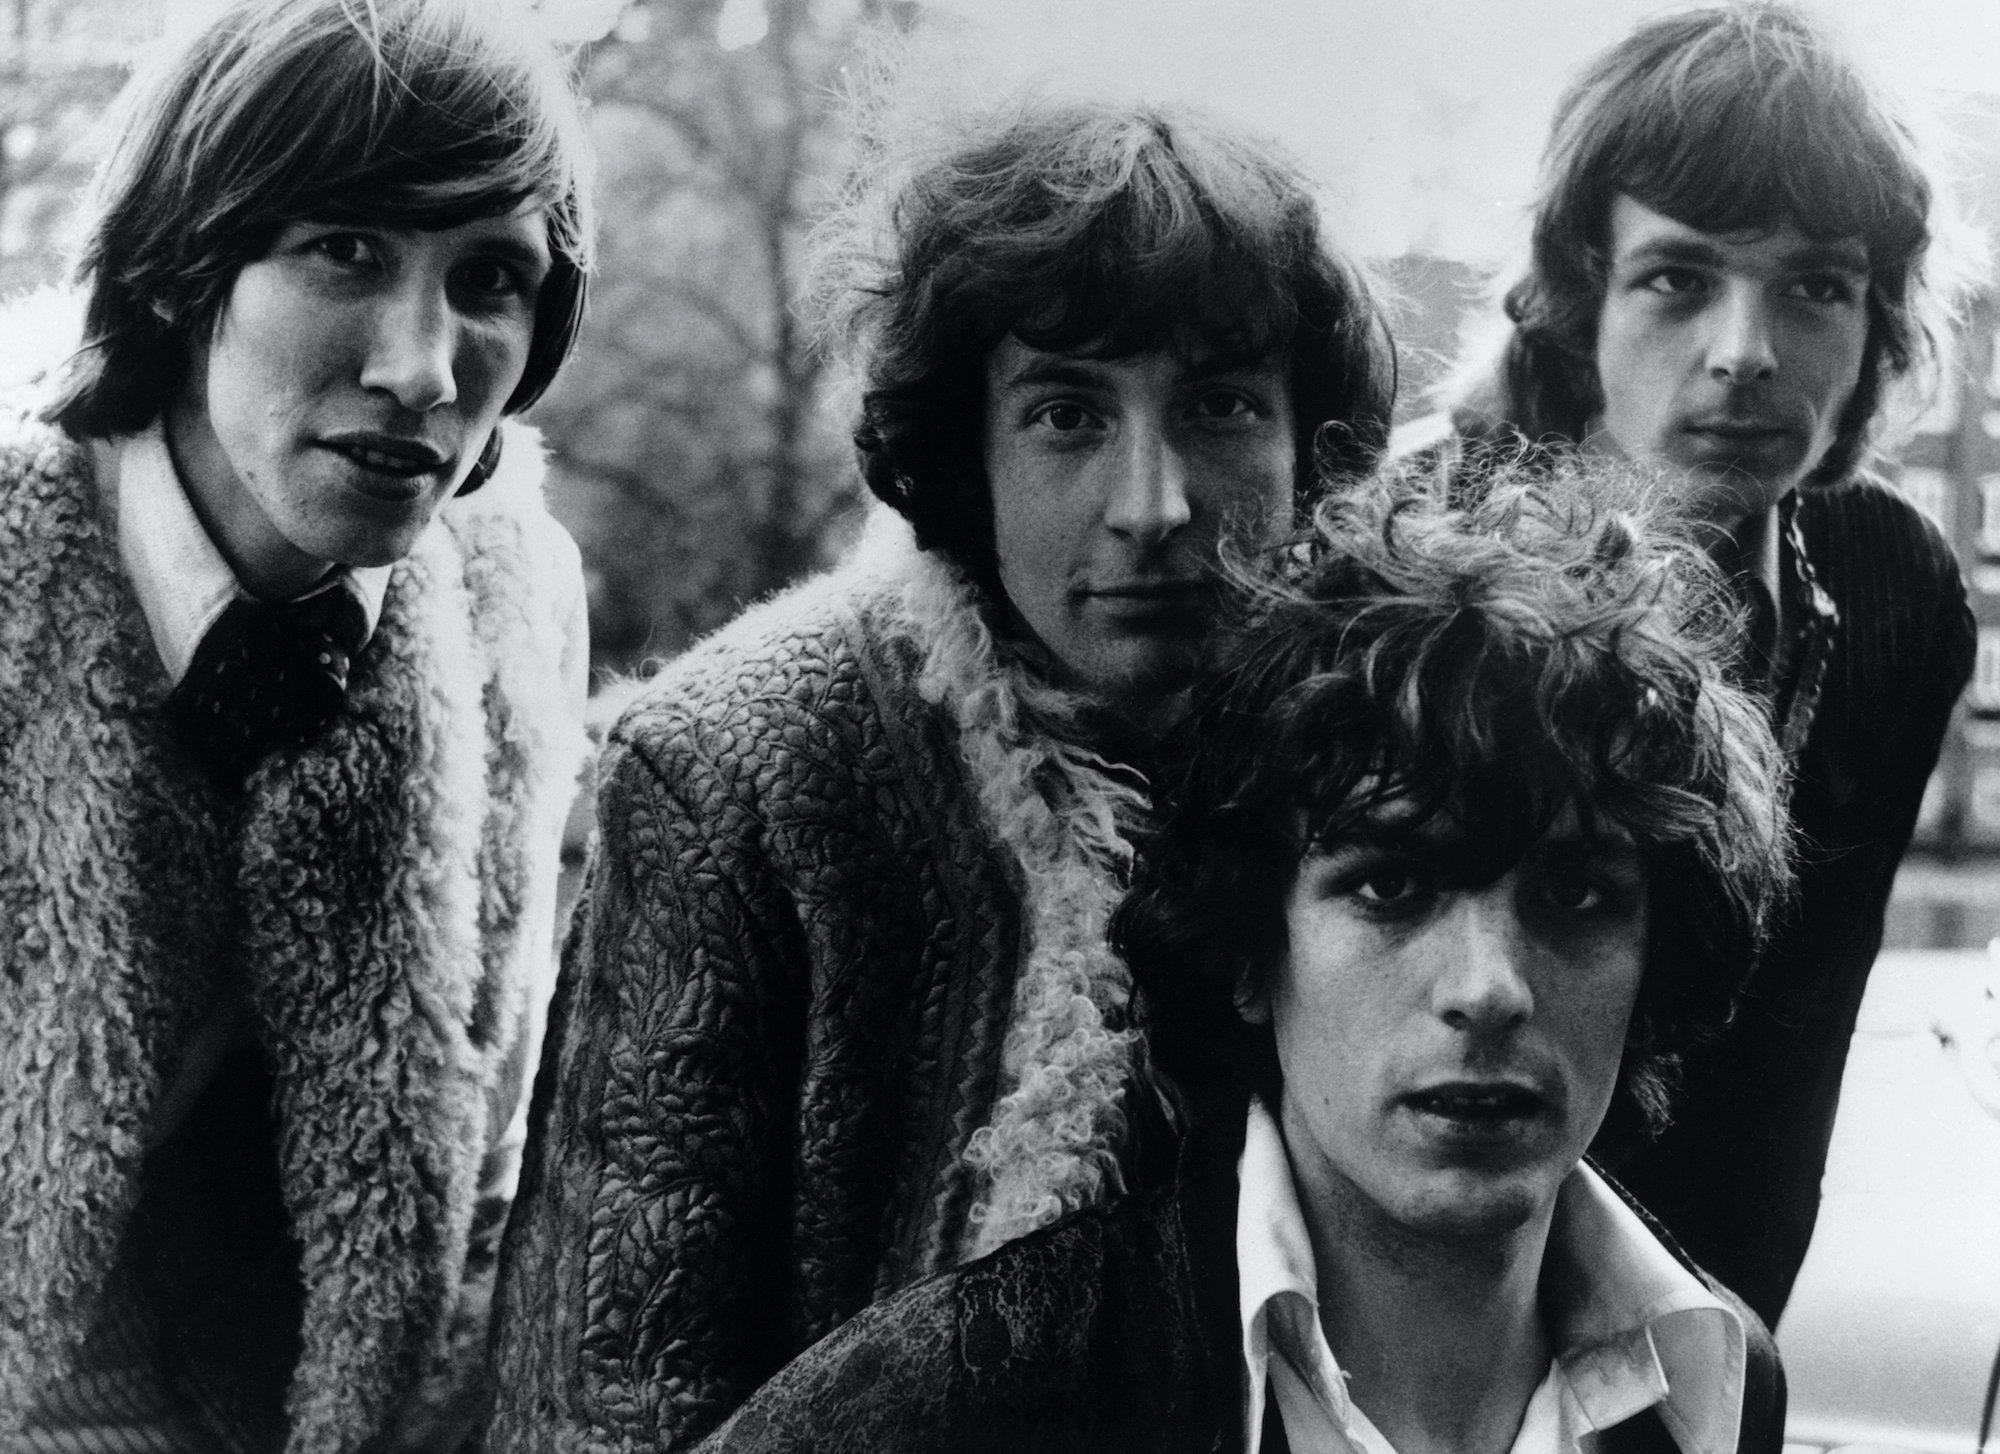 Pink Floyd in a black and white photo from 1965